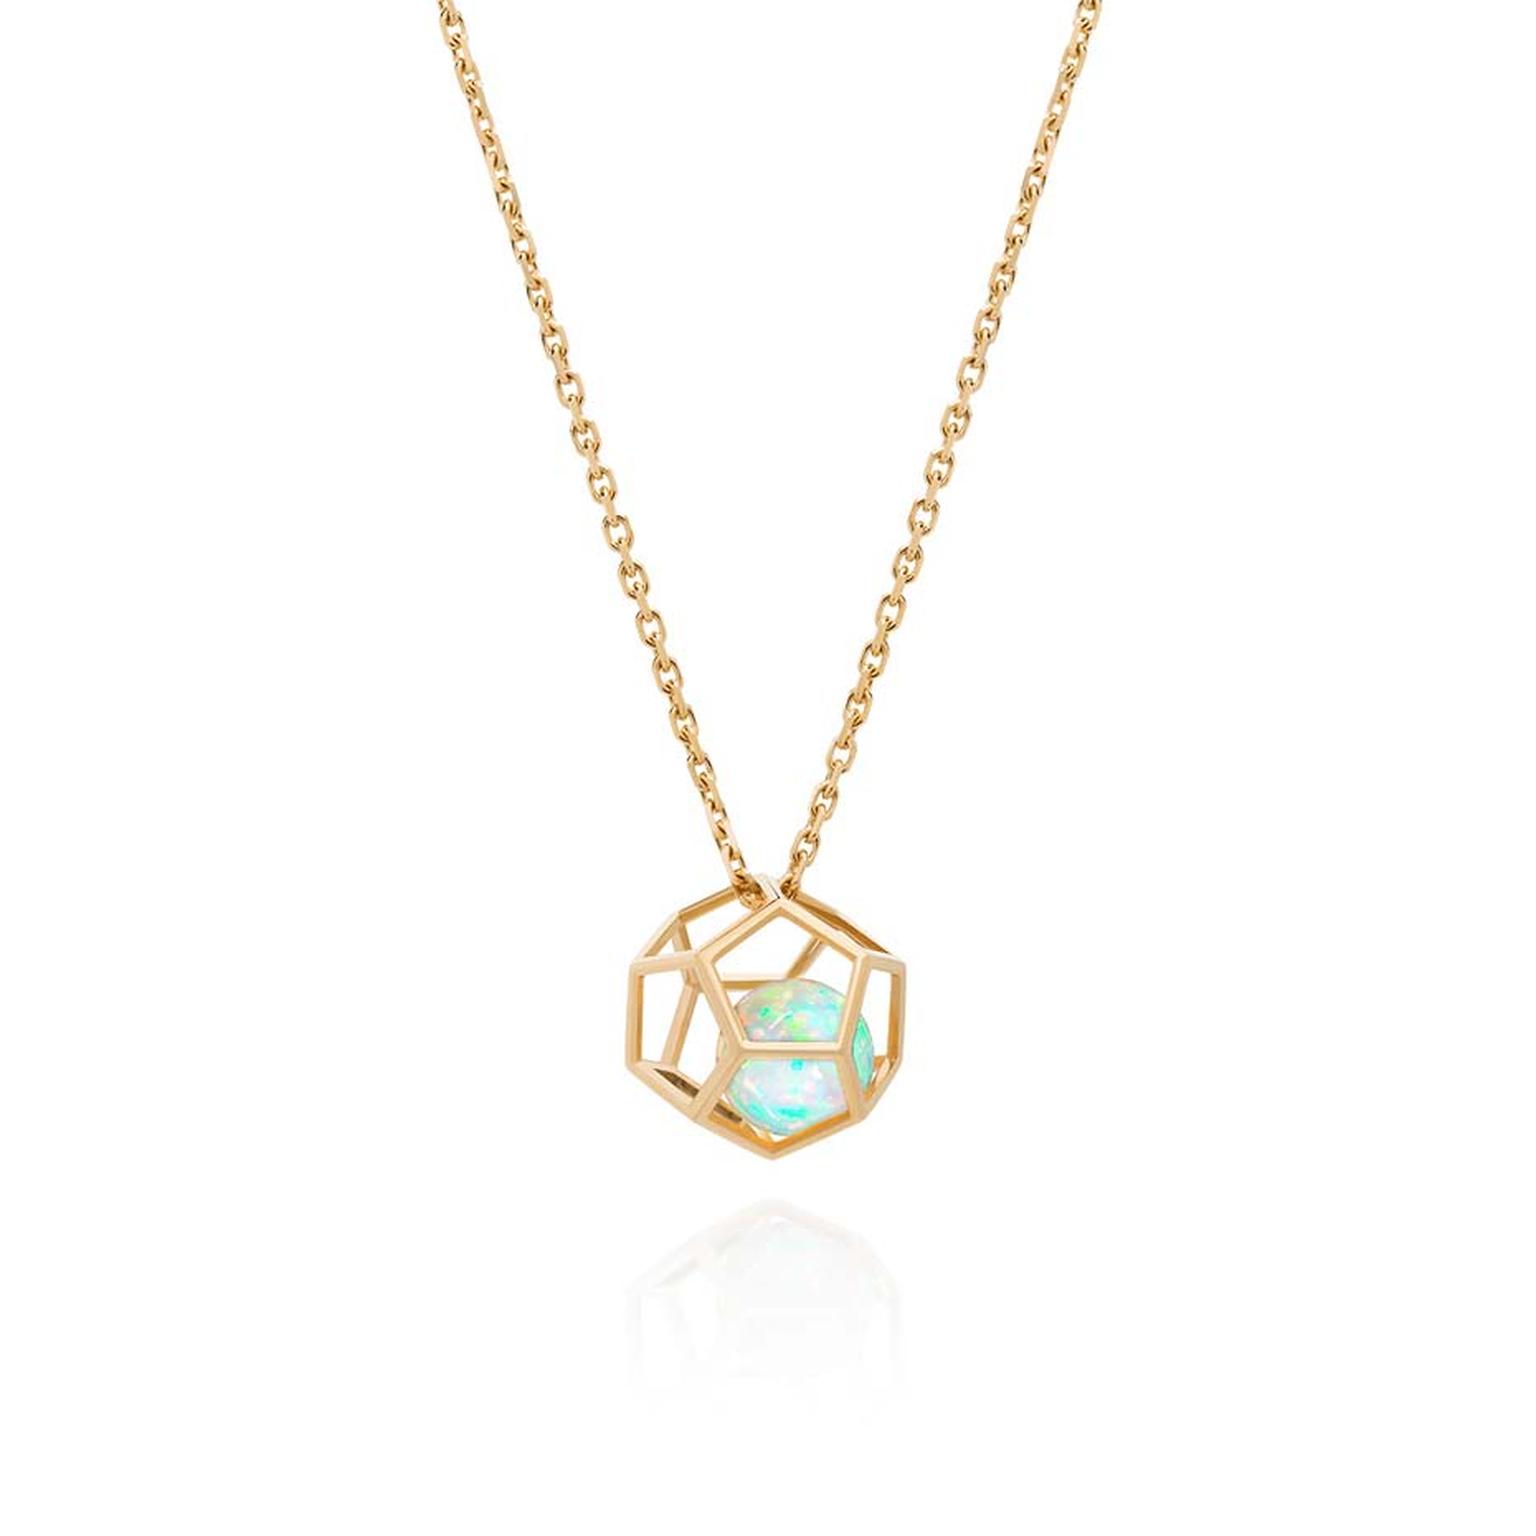 Ornella Iannuzi Rock It! necklace featuring an opal floating inside a gold dodecahedron cage.